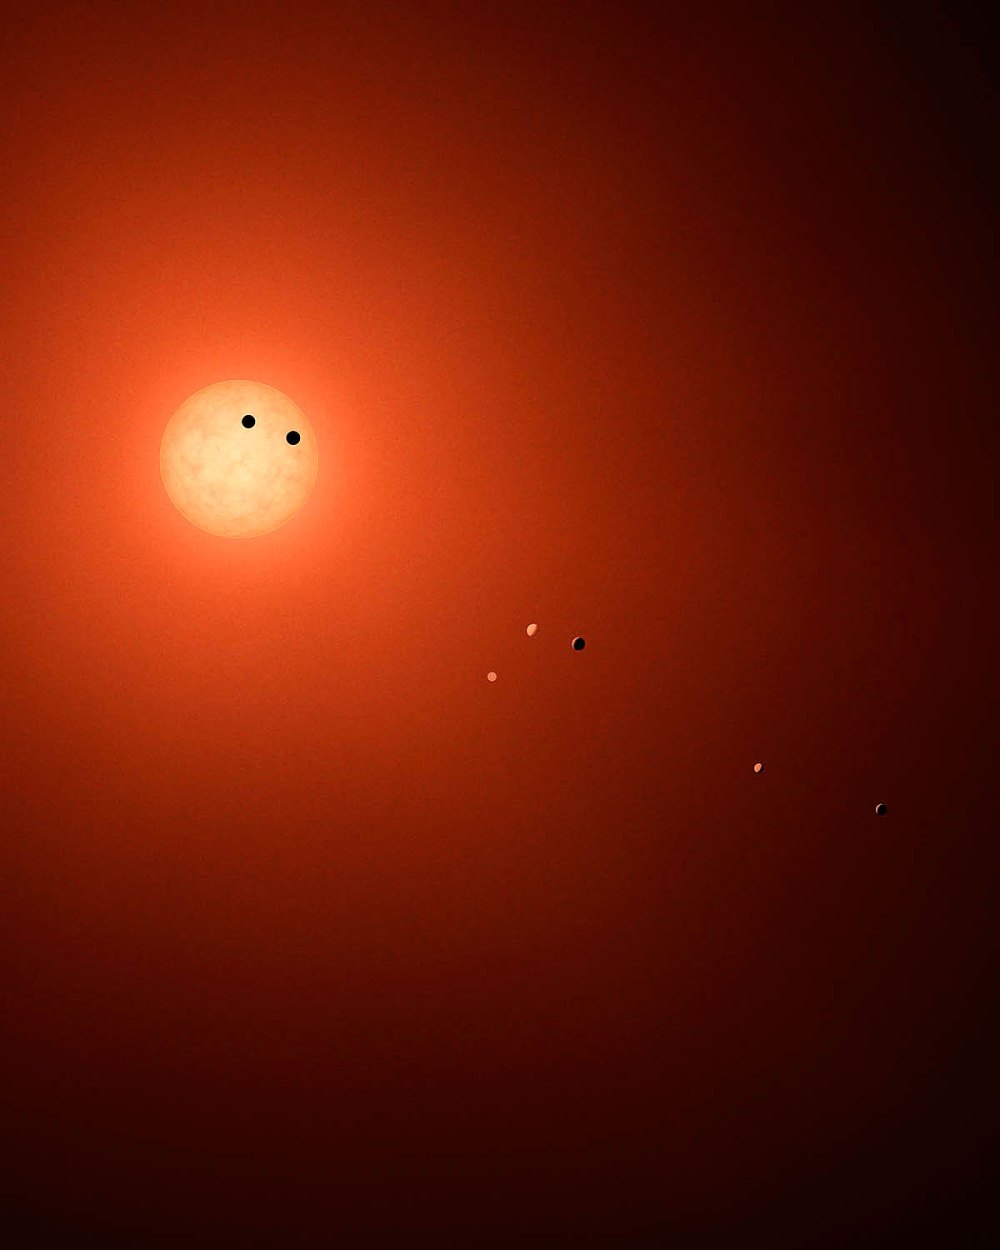 This illustration shows the seven TRAPPIST-1 planets as they might look as viewed from Earth using a fictional, incredibly powerful telescope. The sizes and relative positions are correctly to scale